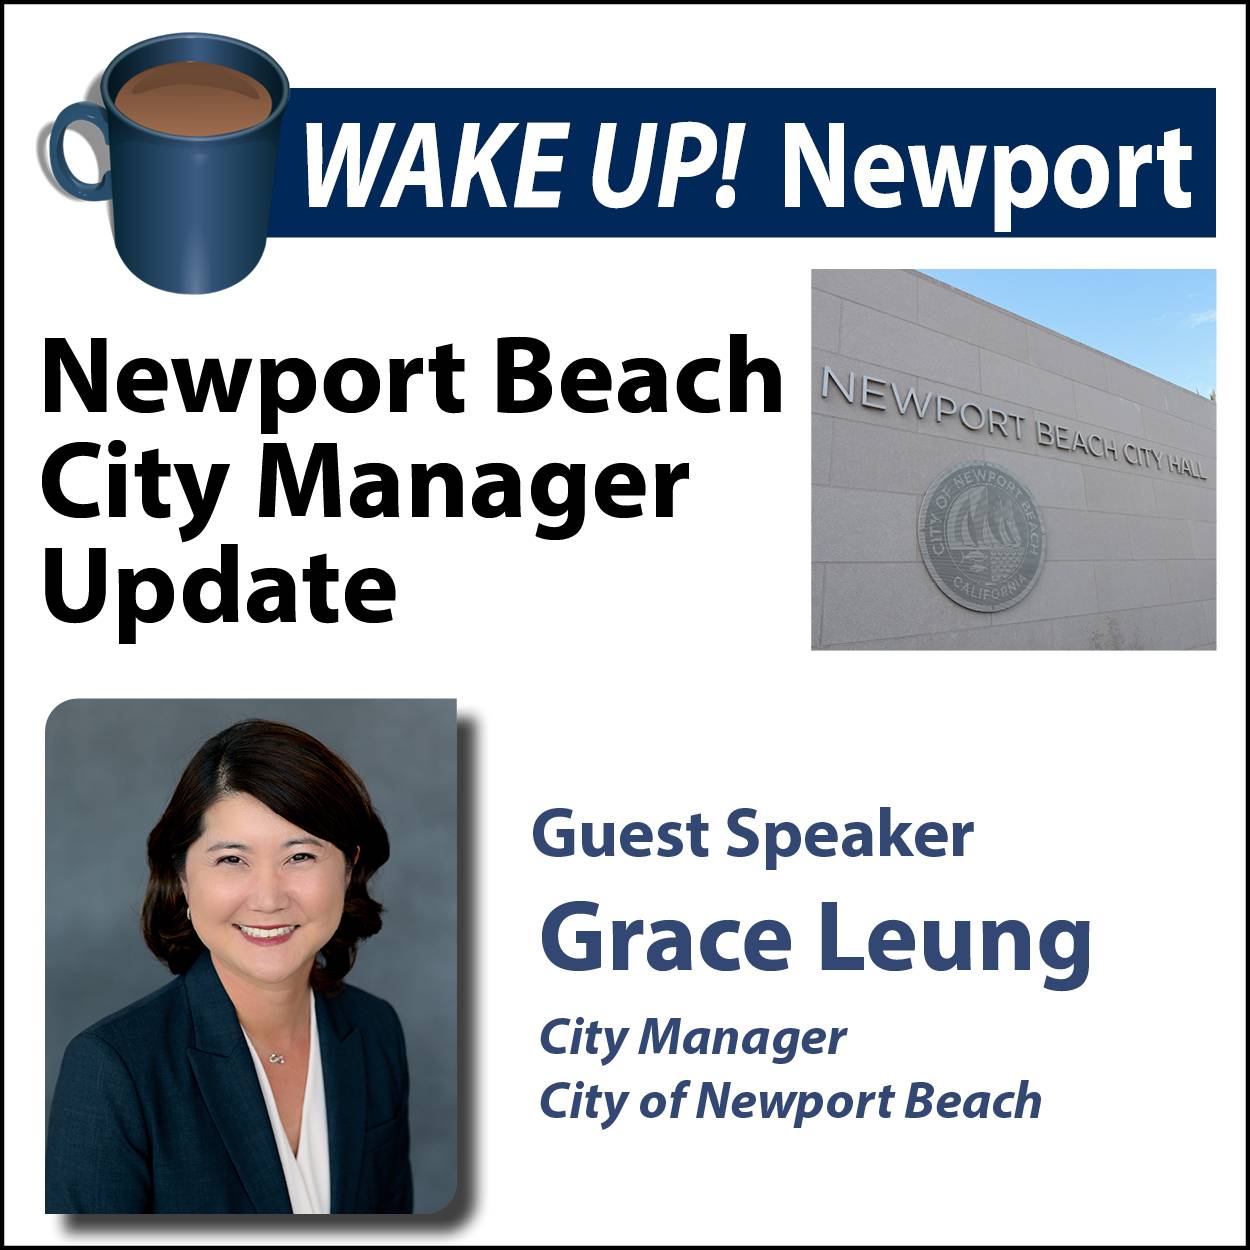 November WAKE UP! Newport - City Manager Update with Grace Leung